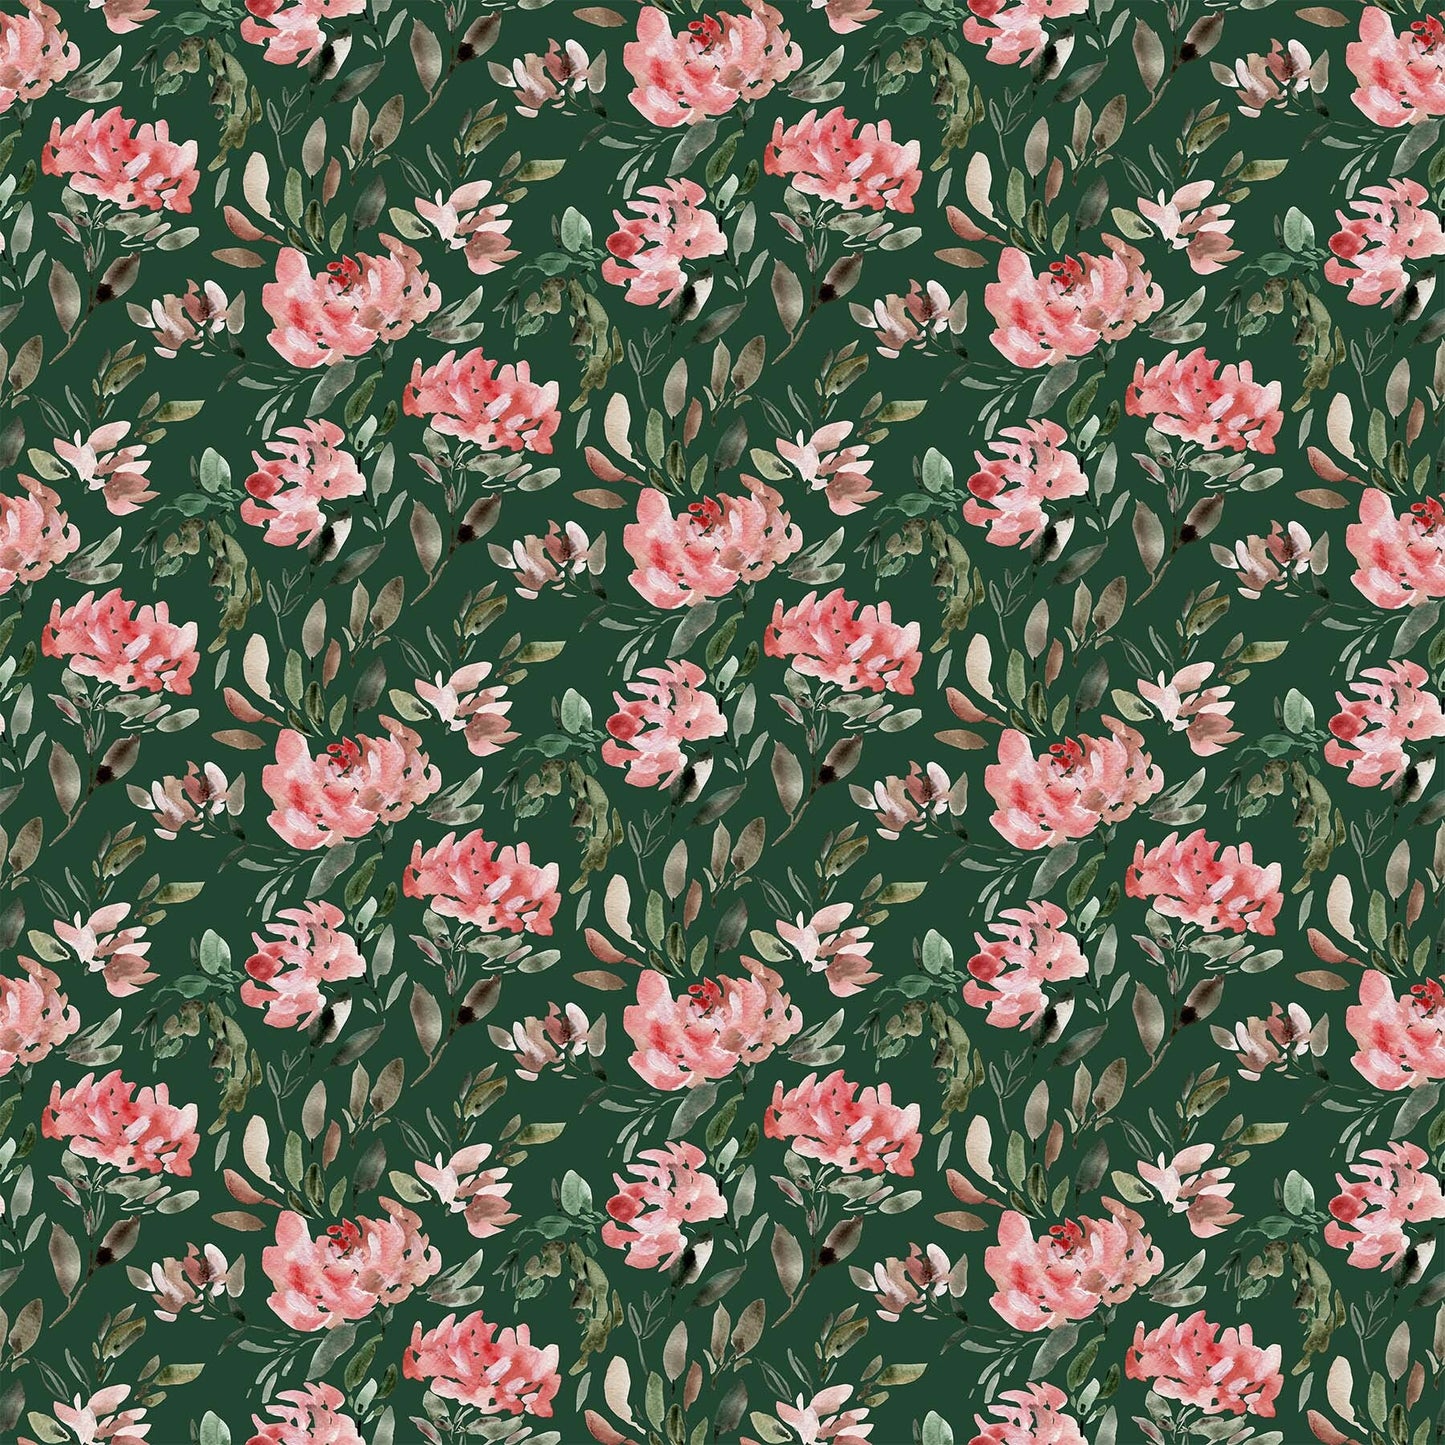 LAST CALL Refresh Tiles, Figo TREFRE42, 10" Inch Precut Fabric Squares, Pink Green Peach Floral Layer Cake Fabric, Anee Shah